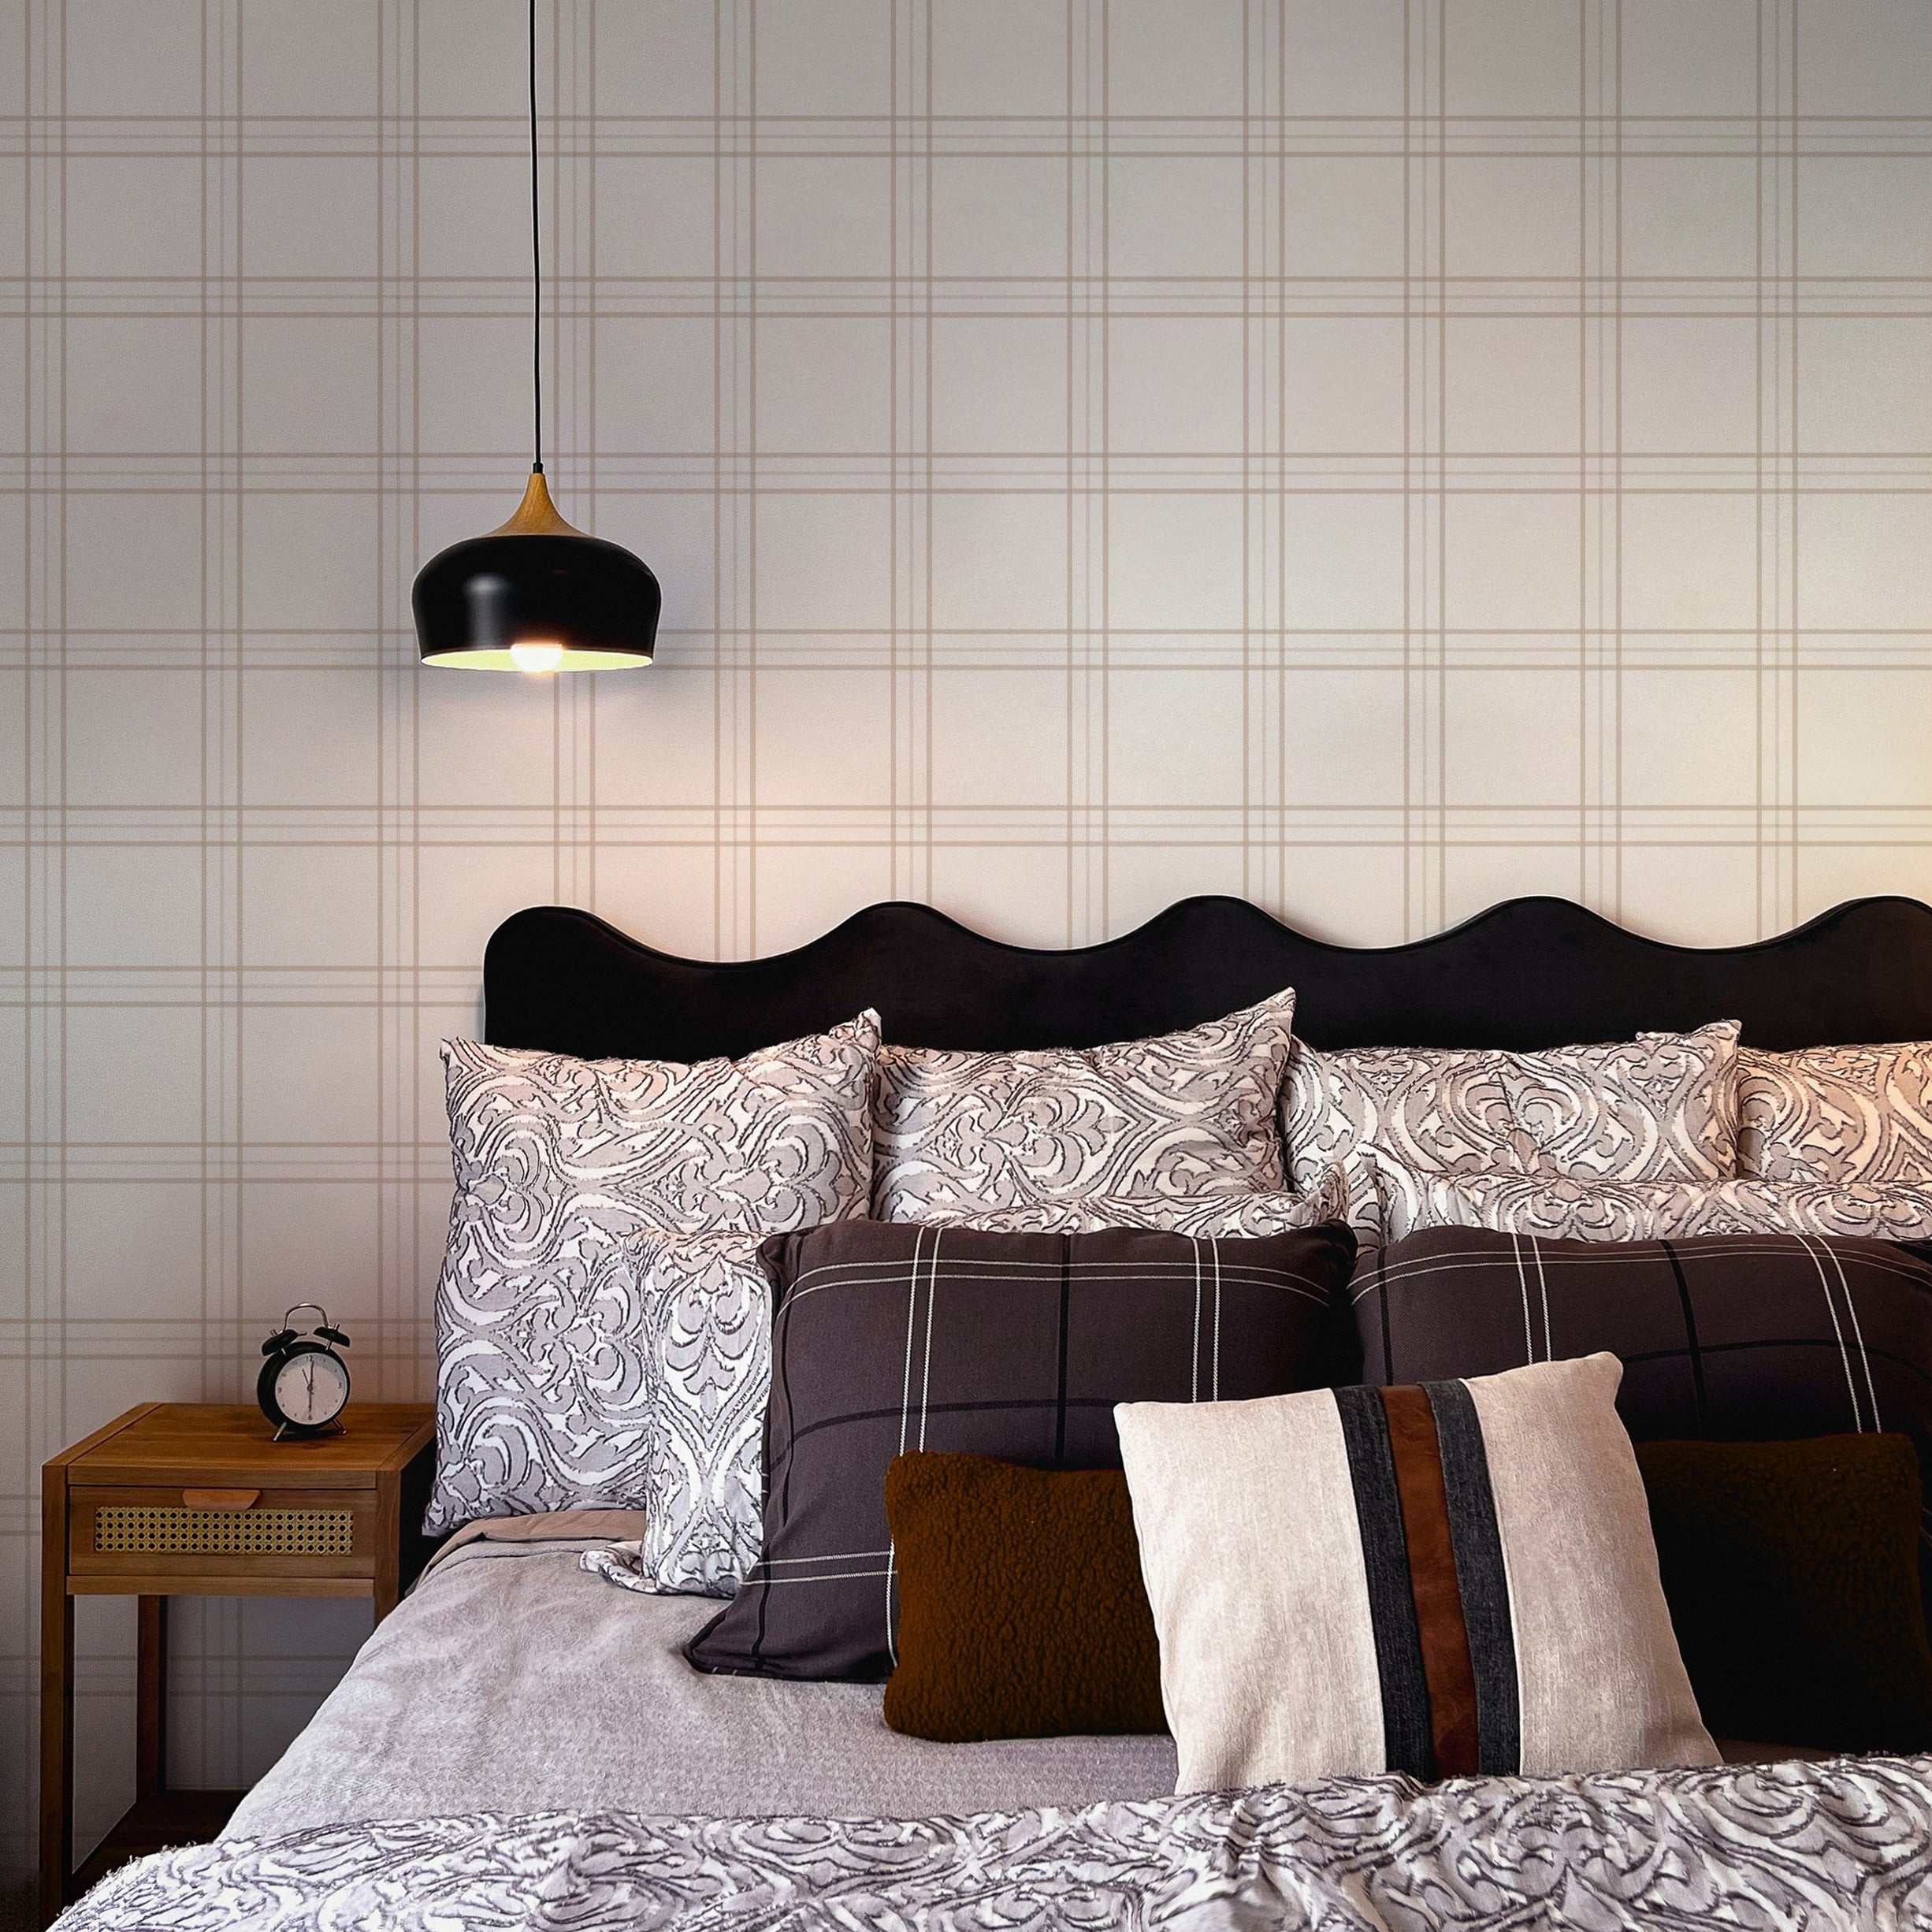 An elegant bedroom interior where the Traditional Tartan Plaid Wallpaper adds a subtle yet impactful backdrop to the stylish monochrome bedding and dark, curvaceous headboard, harmoniously paired with a modern black pendant light and wooden nightstand.